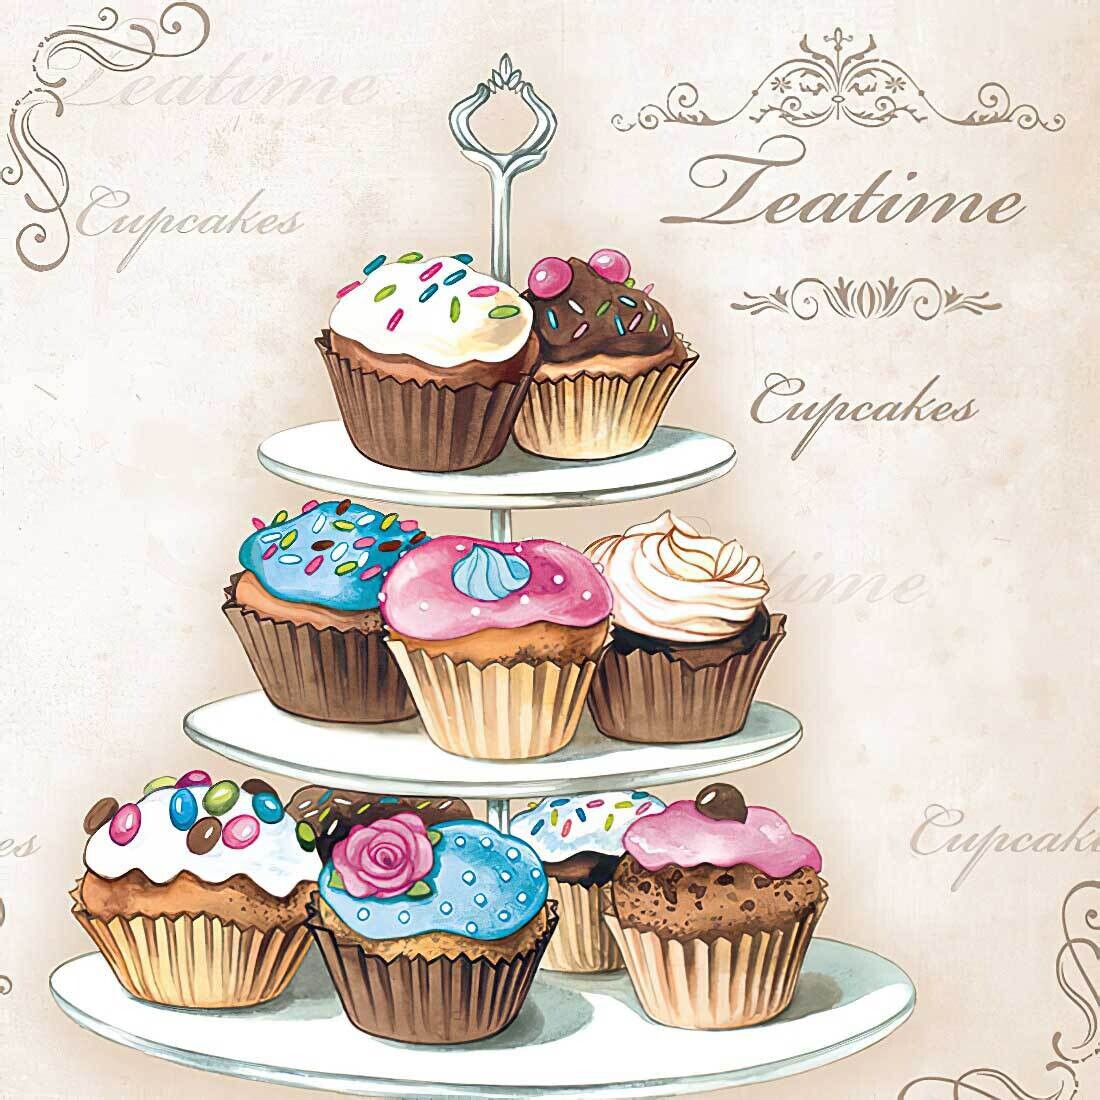 Decoupage Paper Napkins - Food & Drinks - Cupcakes on Etagere 13x13 (1 Sheet)